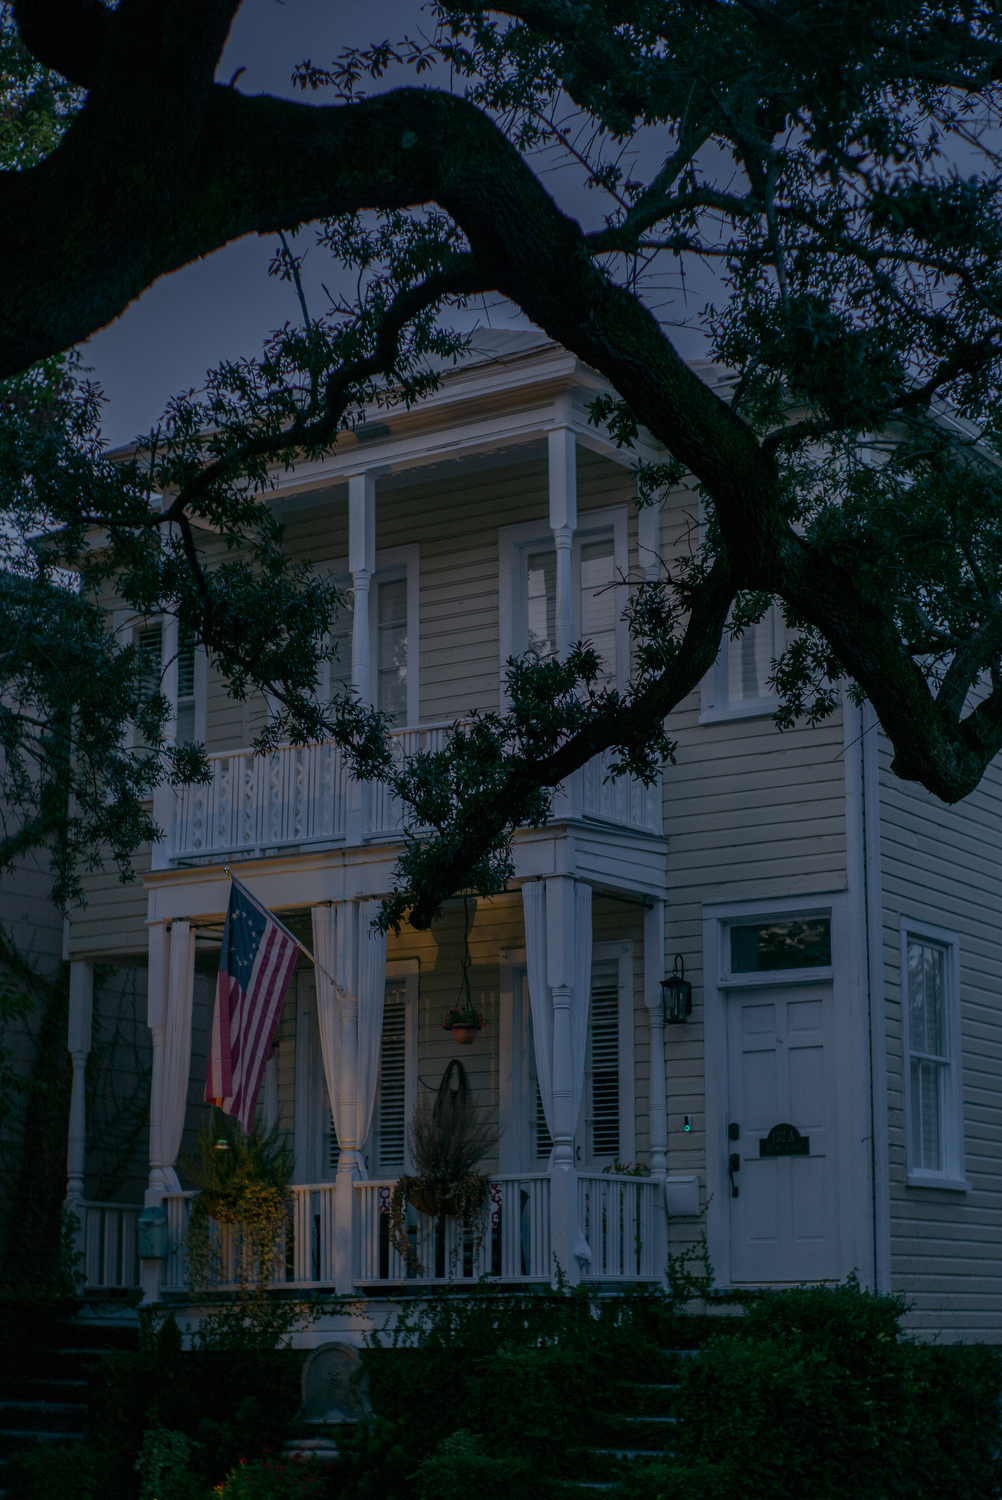 A house flying a Betsy Ross American flag, in Charleston, South Carolina.